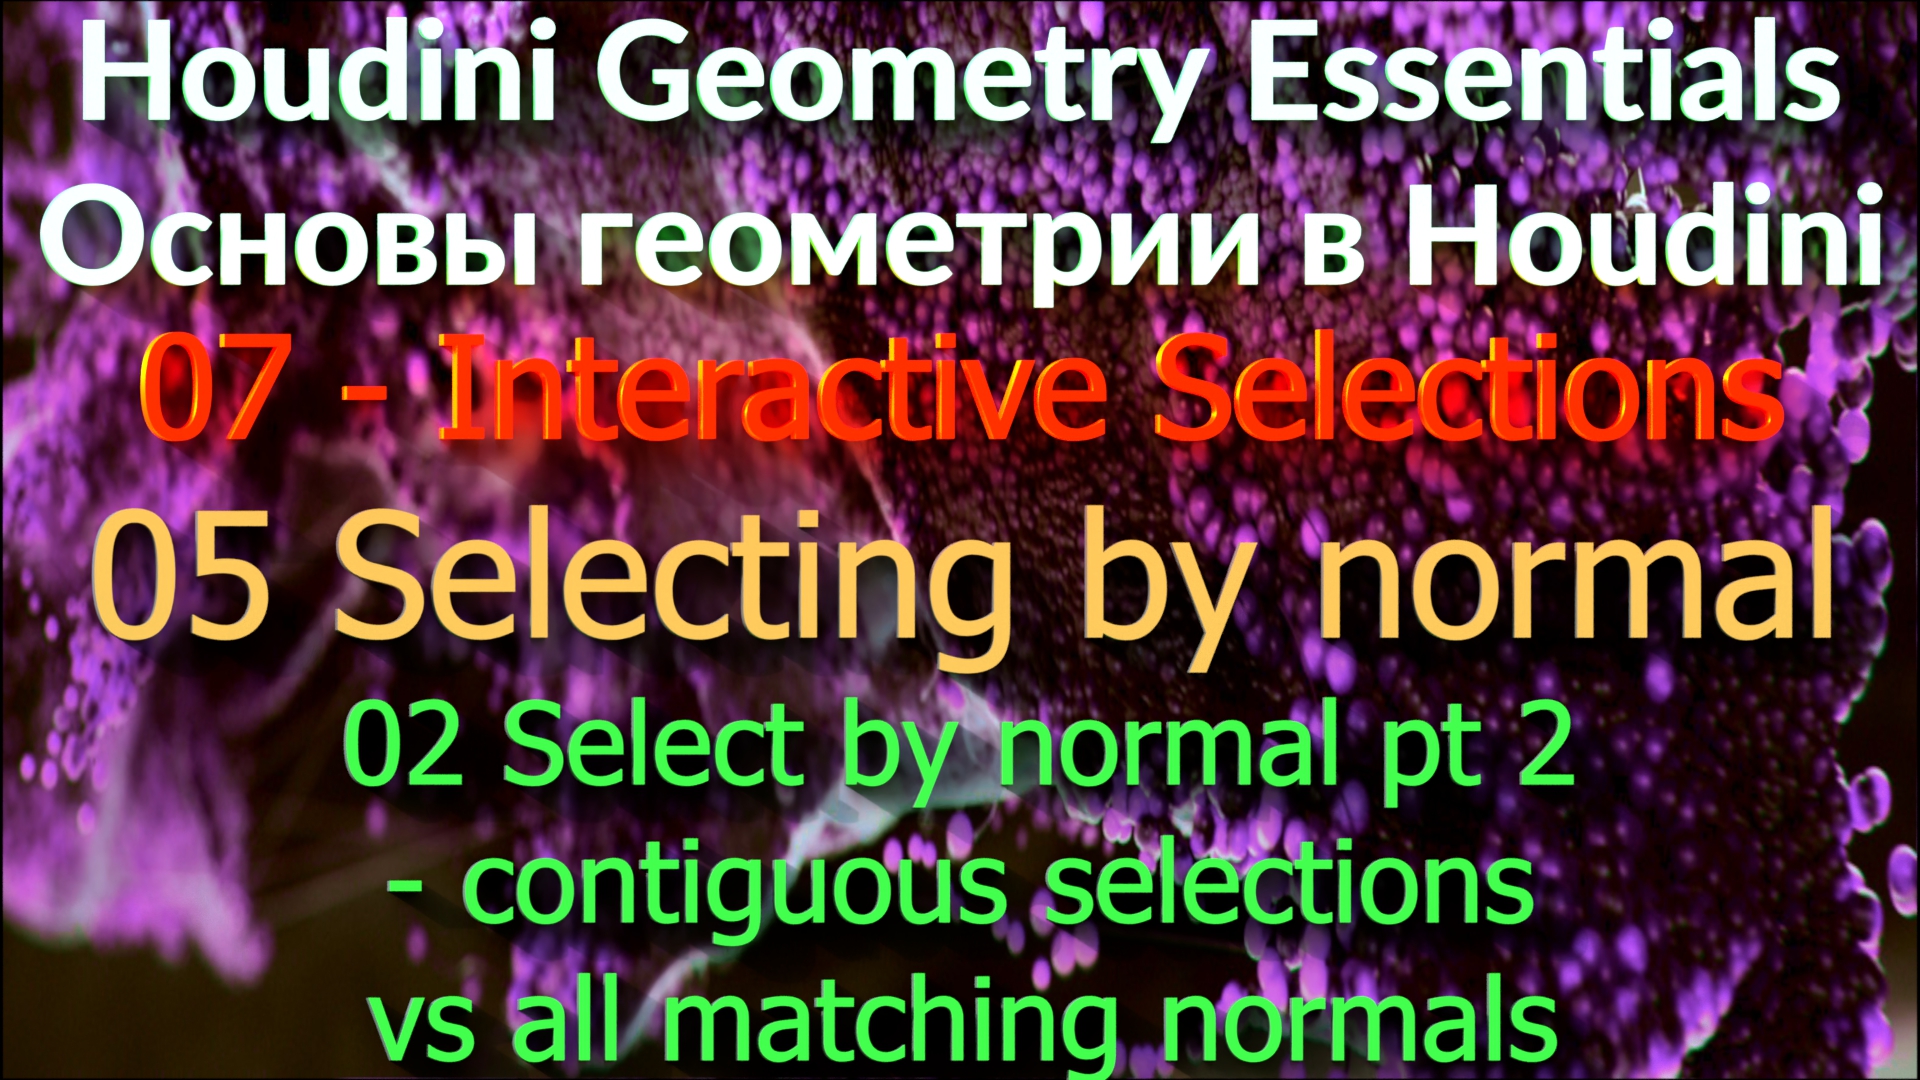 07_05_02 Select by normal pt 2 - contiguous selections vs all matching normals